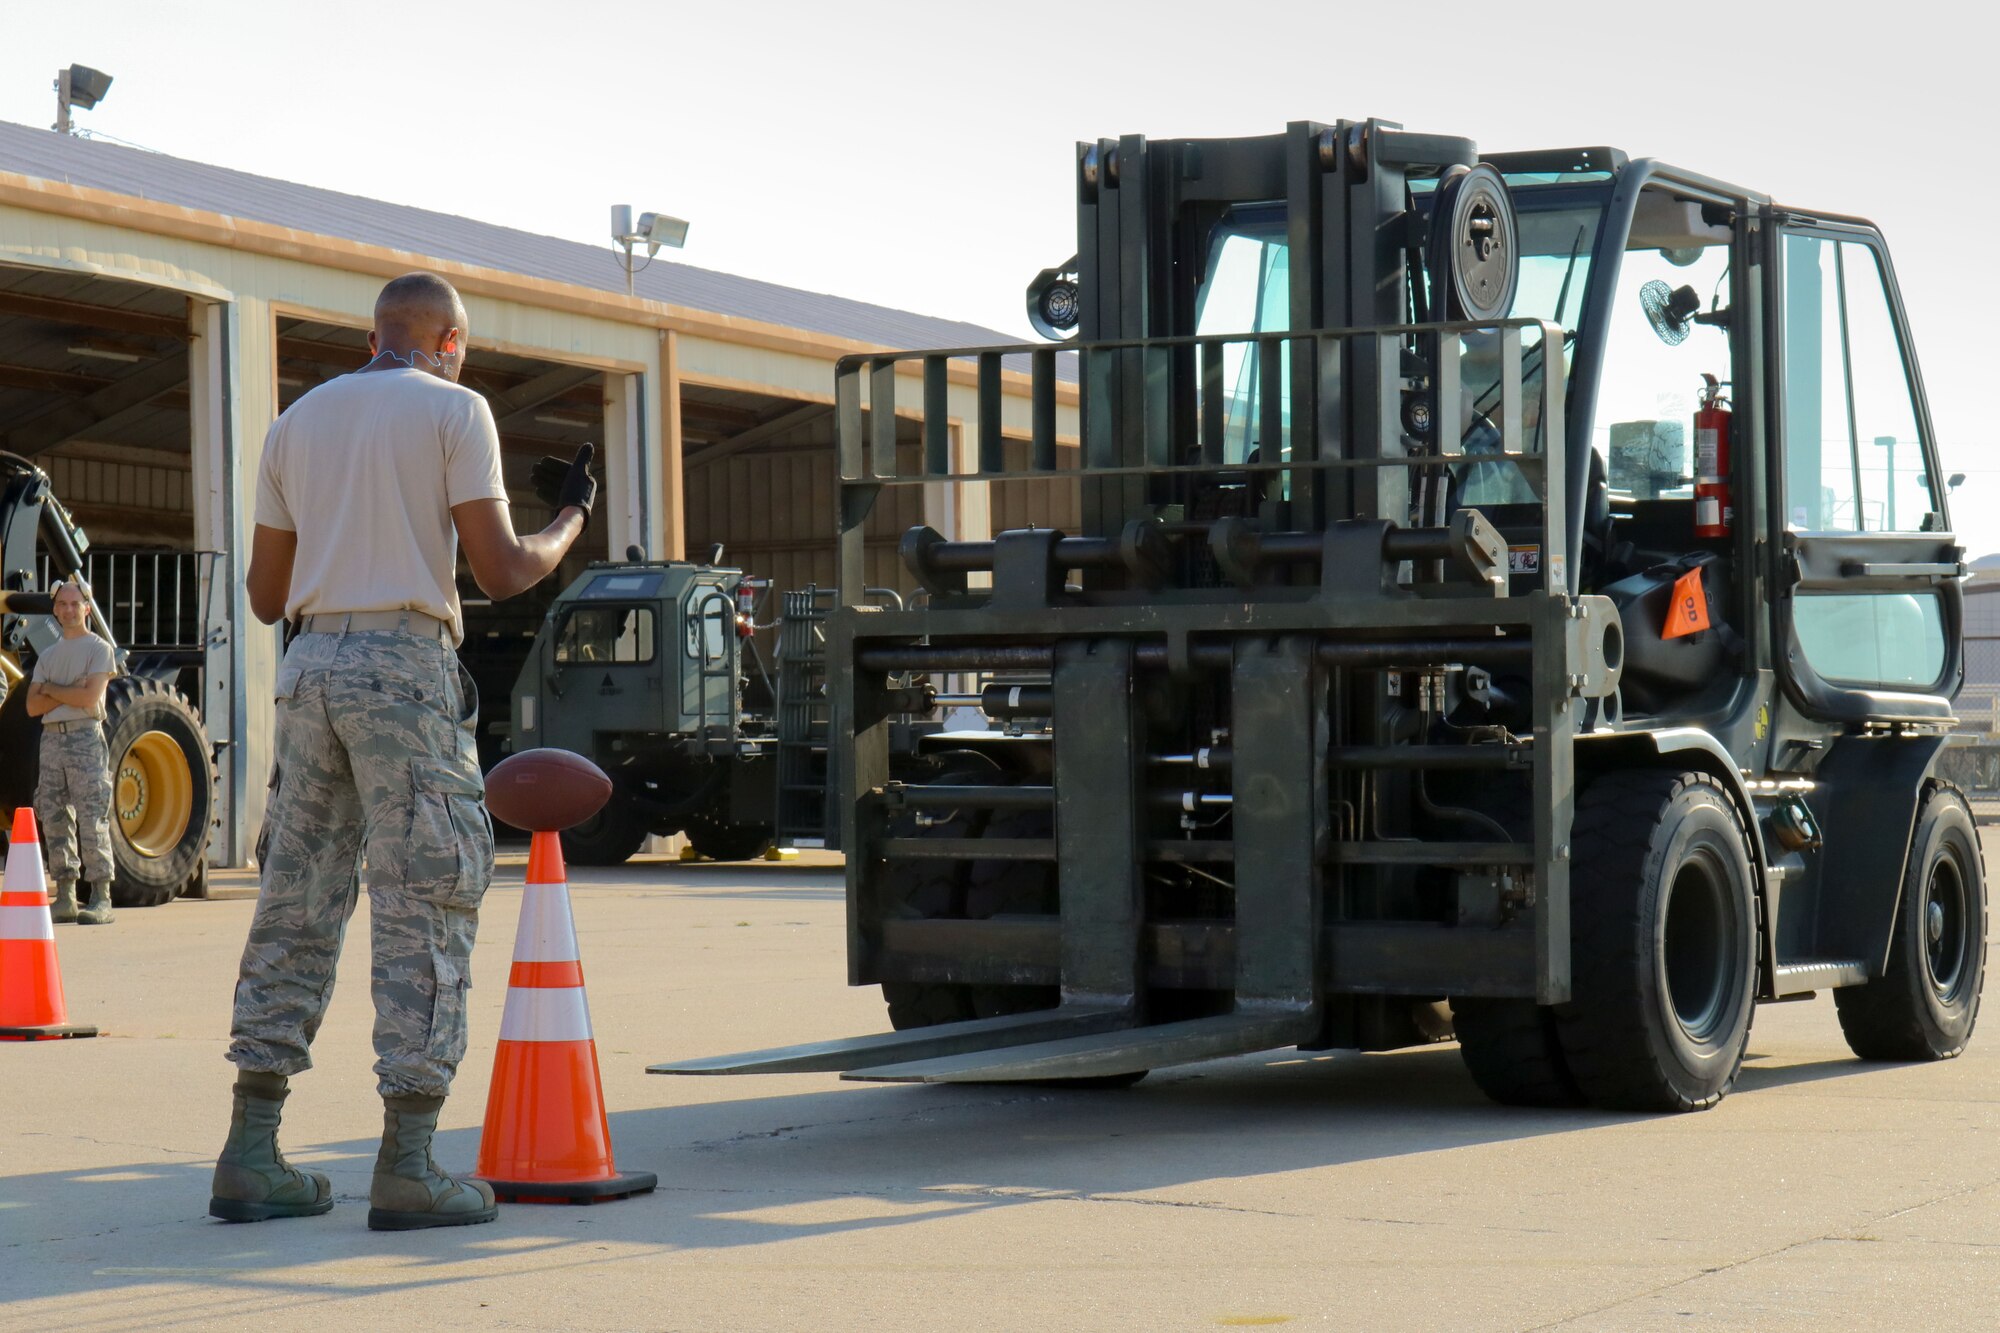 Senior Airman Samuel Lee, 72nd Aerial Port Squadron aerial transportation specialist, directs a forklift during a rodeo, Sept. 6, 2019, at Tinker Air Force Base, Oklahoma. The rodeo incorporated various jobs competed by aerial port in a fun and competitive atmosphere. (U.S. Air Force photo by Senior Airman Mary Begy)